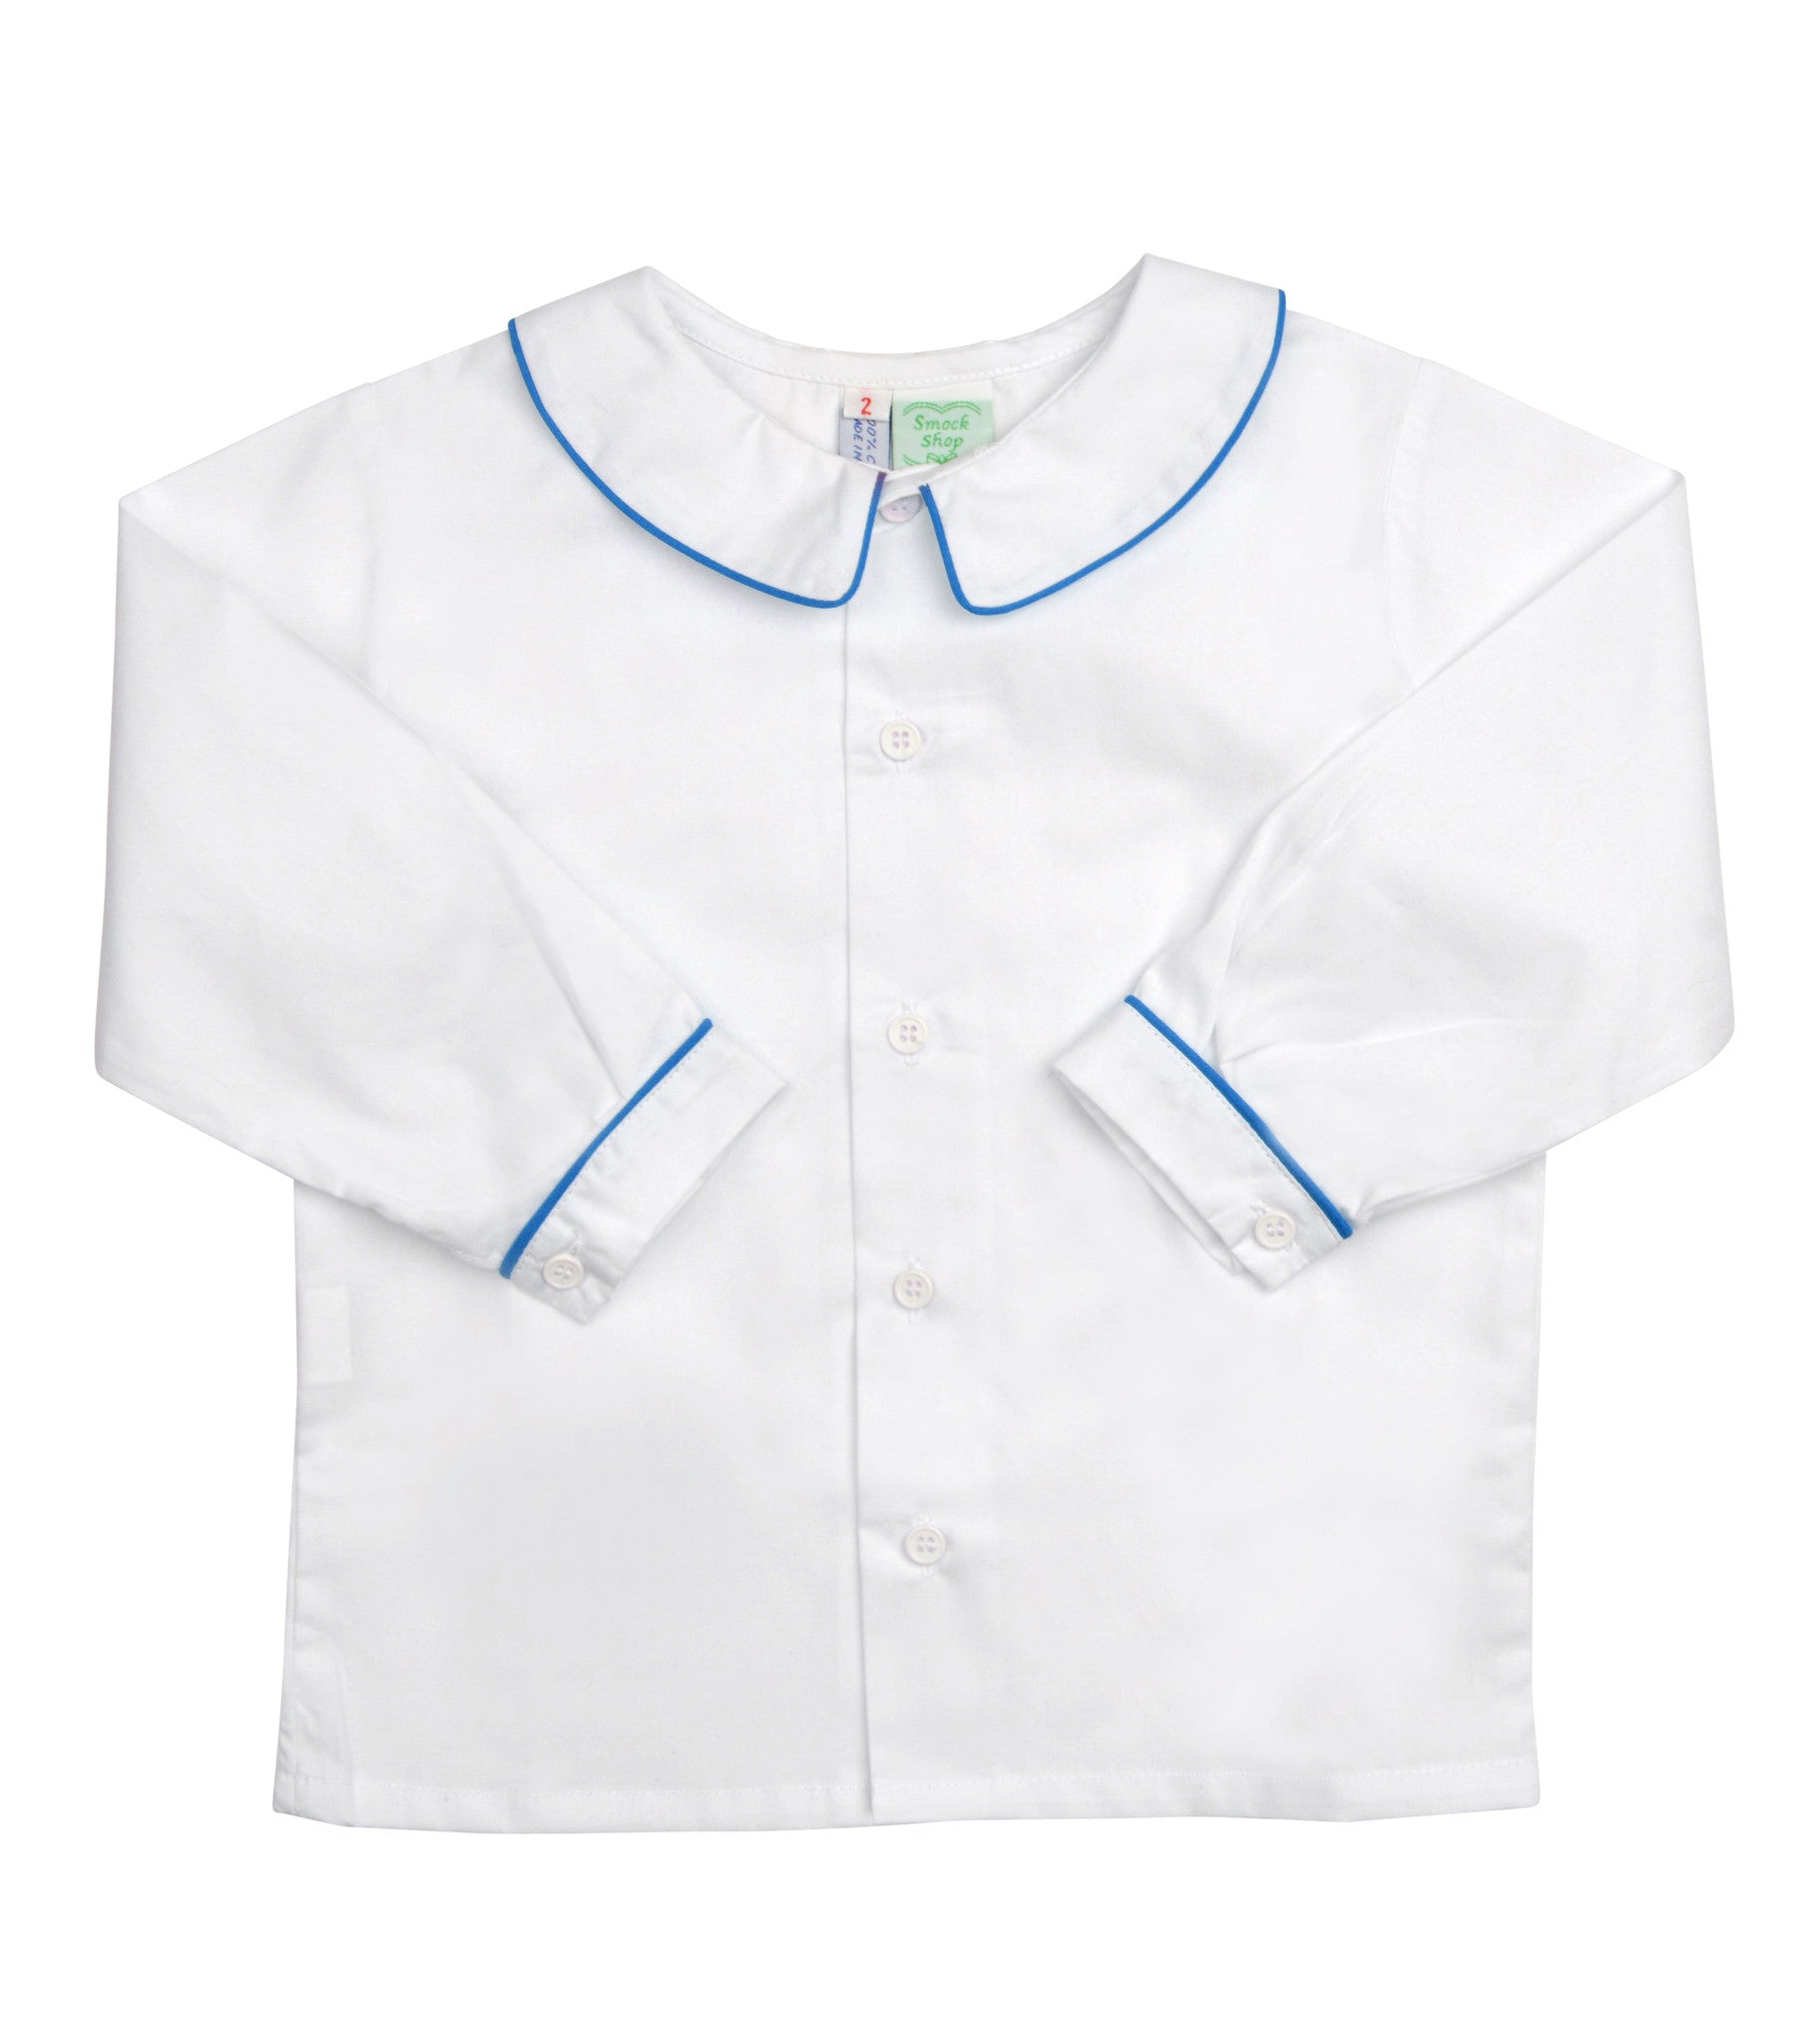 White Peter Pan Collared Shirt with Blue Piping - Amelia Brennan